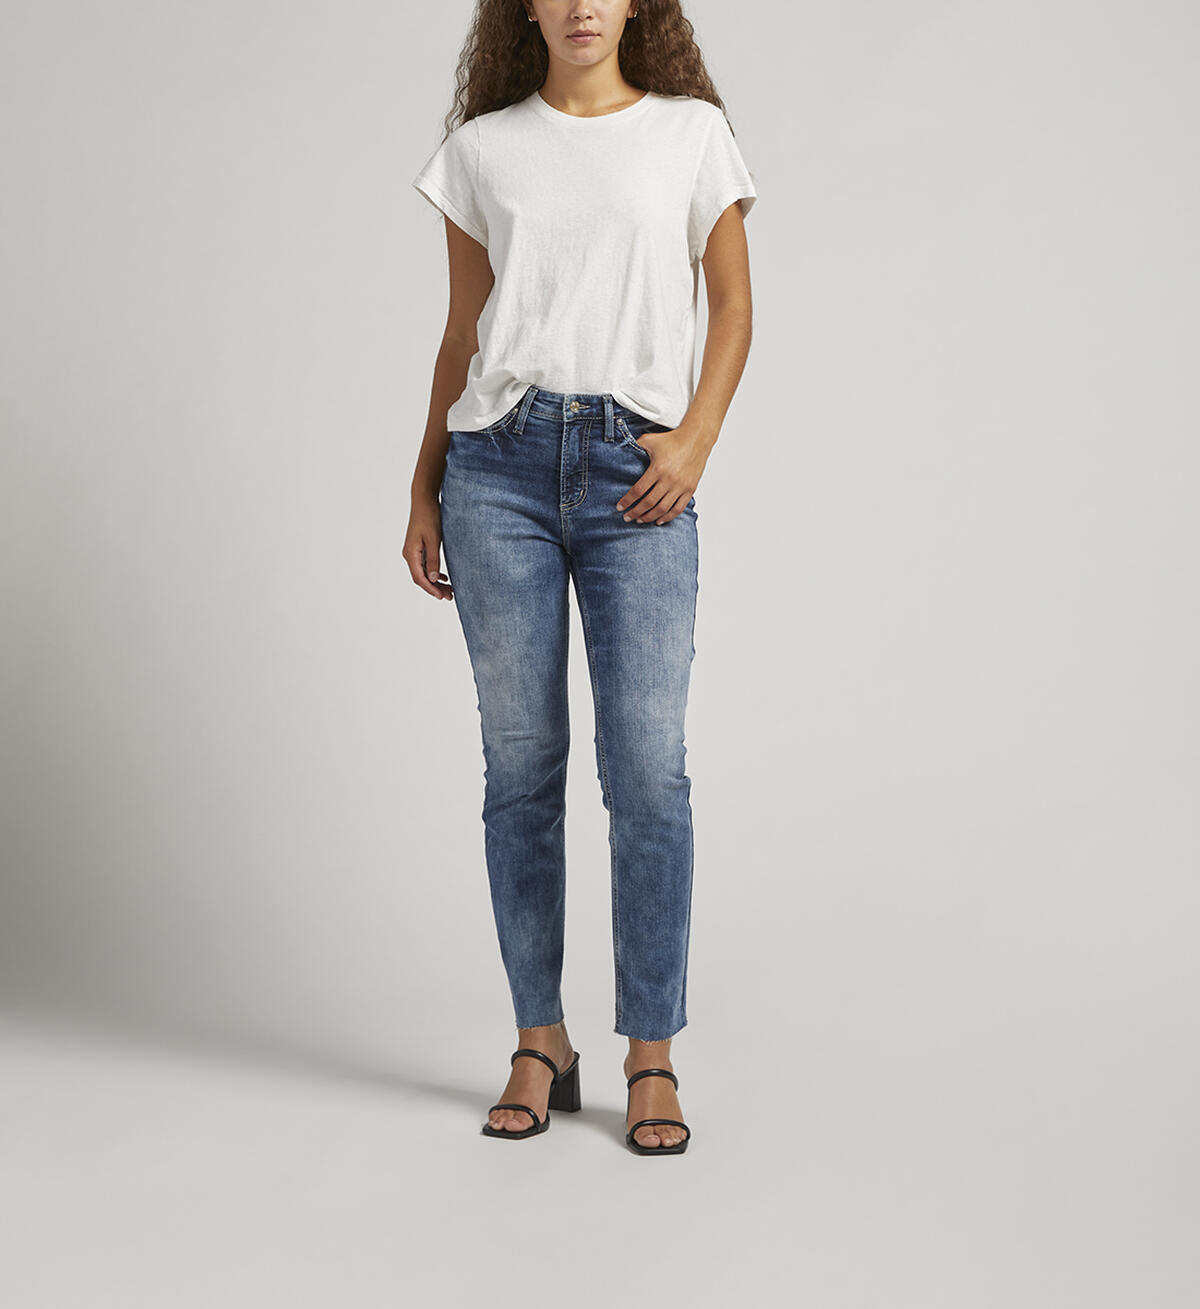 Hello Legs High Rise Slim Straight Jeans, , hi-res image number 0